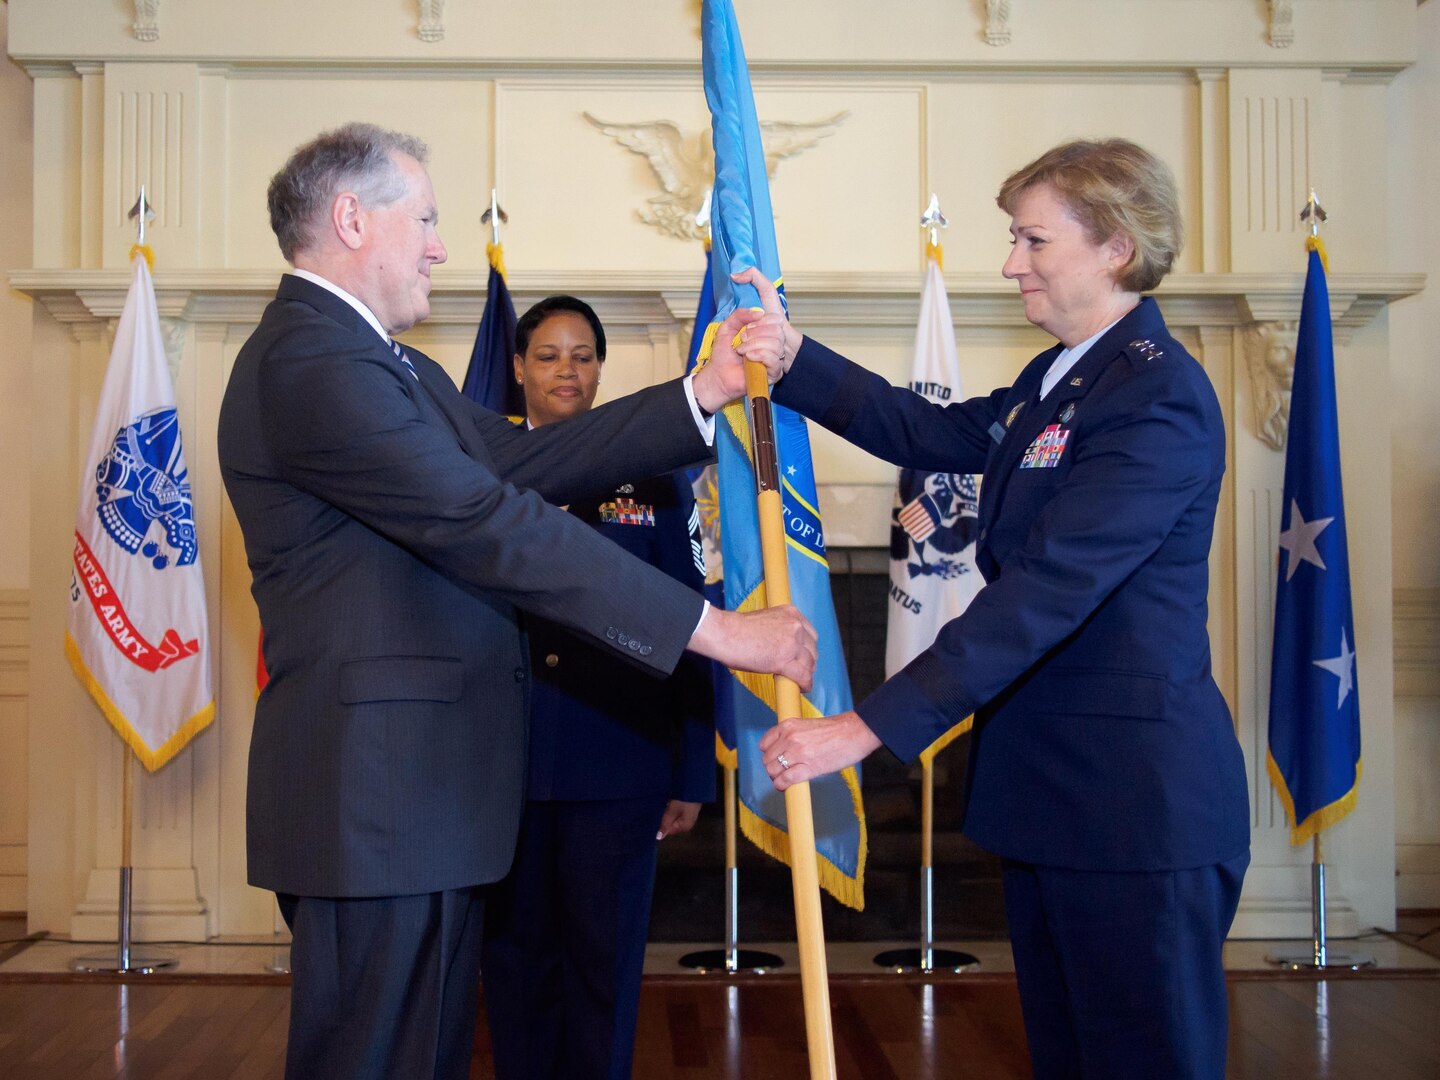 Air Force Lt. Gen. Wendy Masiello, incoming Defense Contract Management Agency director, accepts the agency's flag from Under Secretary of Defense for Acquisition, Technology and Logistics Frank Kendall during a change of leadership ceremony on Fort Lee, Va., today. 